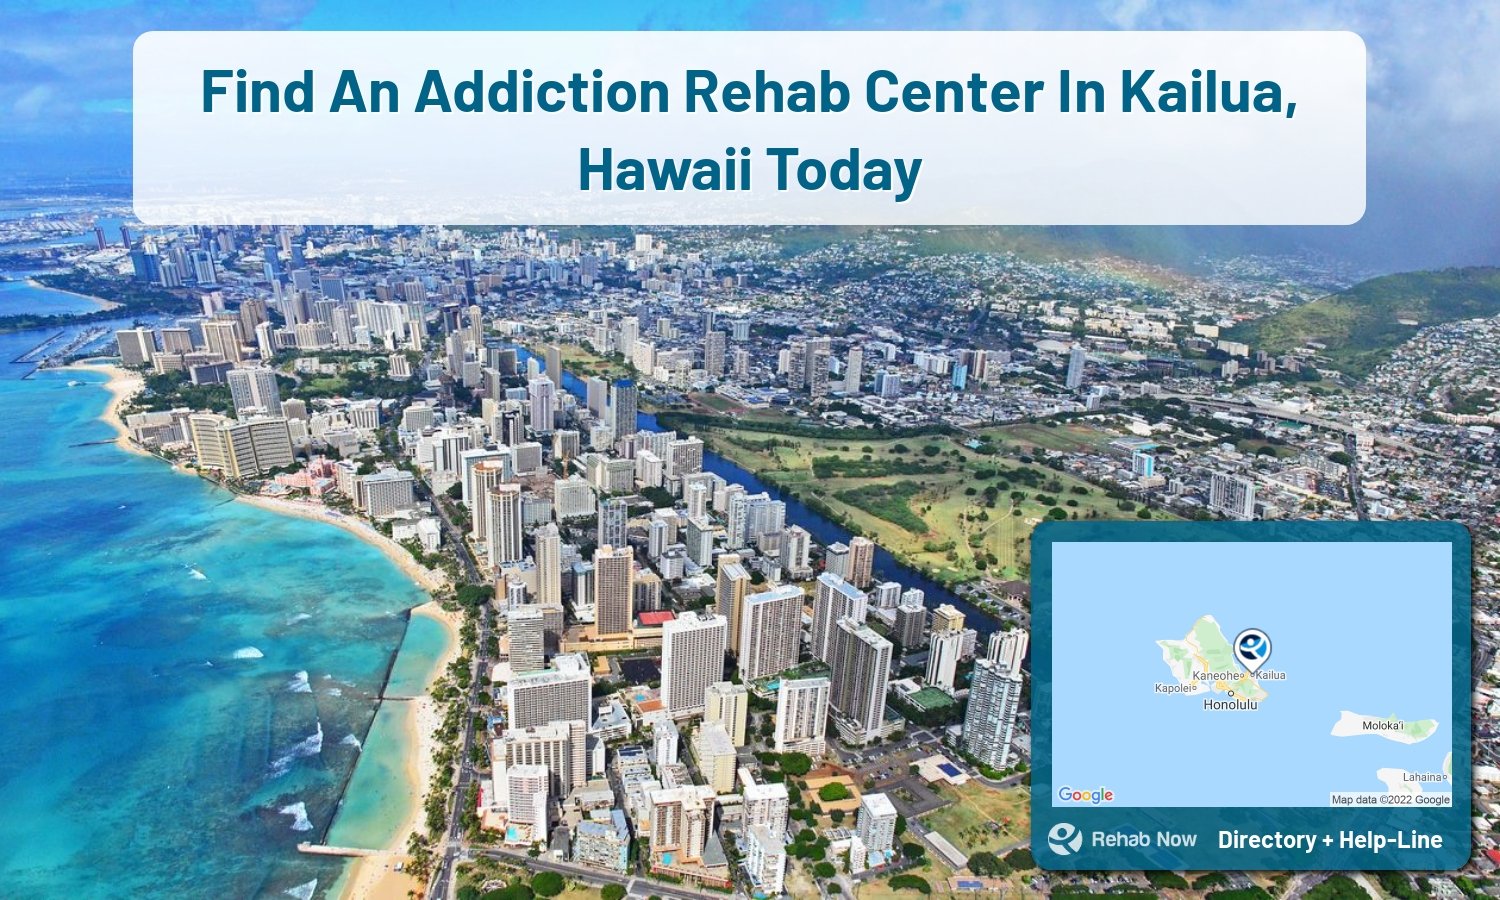 Need treatment nearby in Kailua, Hawaii? Choose a drug/alcohol rehab center from our list, or call our hotline now for free help.